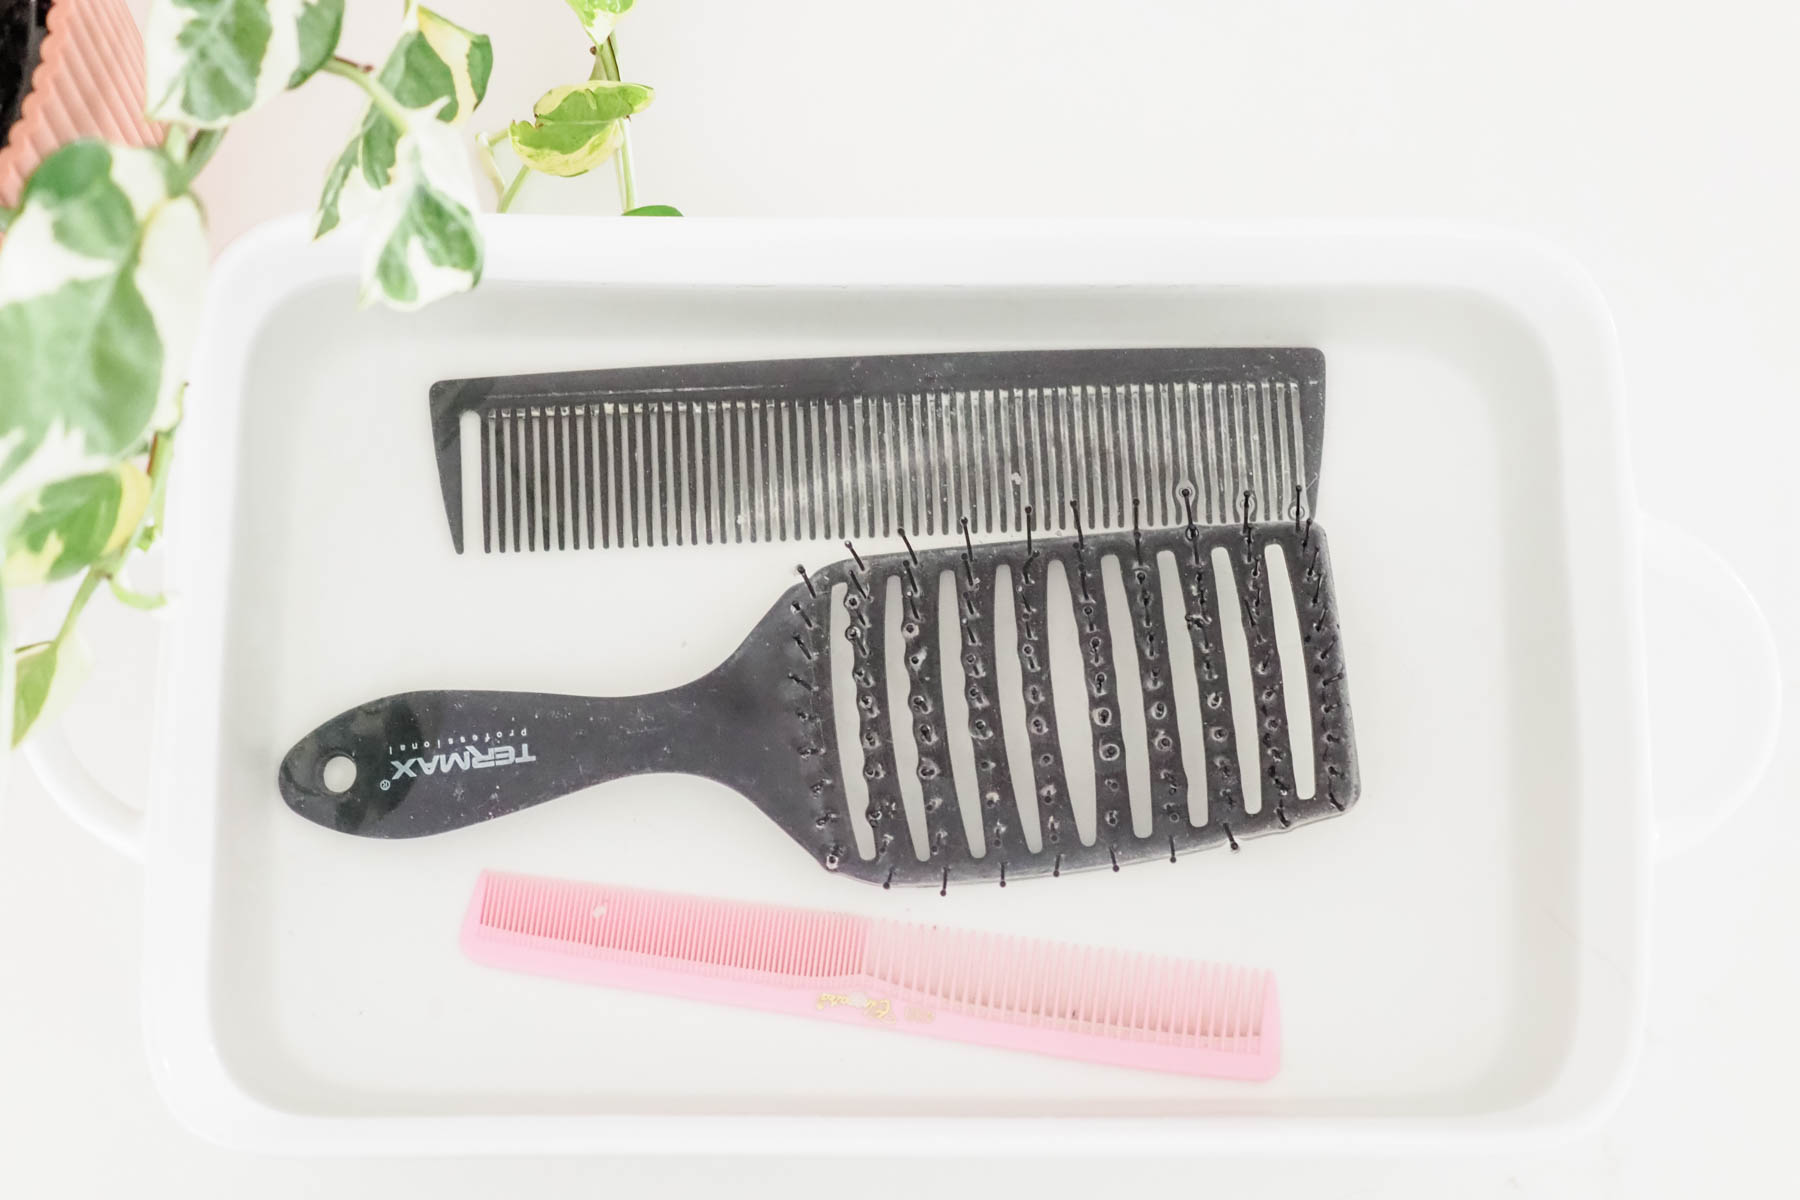 https://theorganisedhousewife.com.au/wp-content/uploads/2023/07/How-to-clean-a-Hairbrush-or-Comb-10.jpg